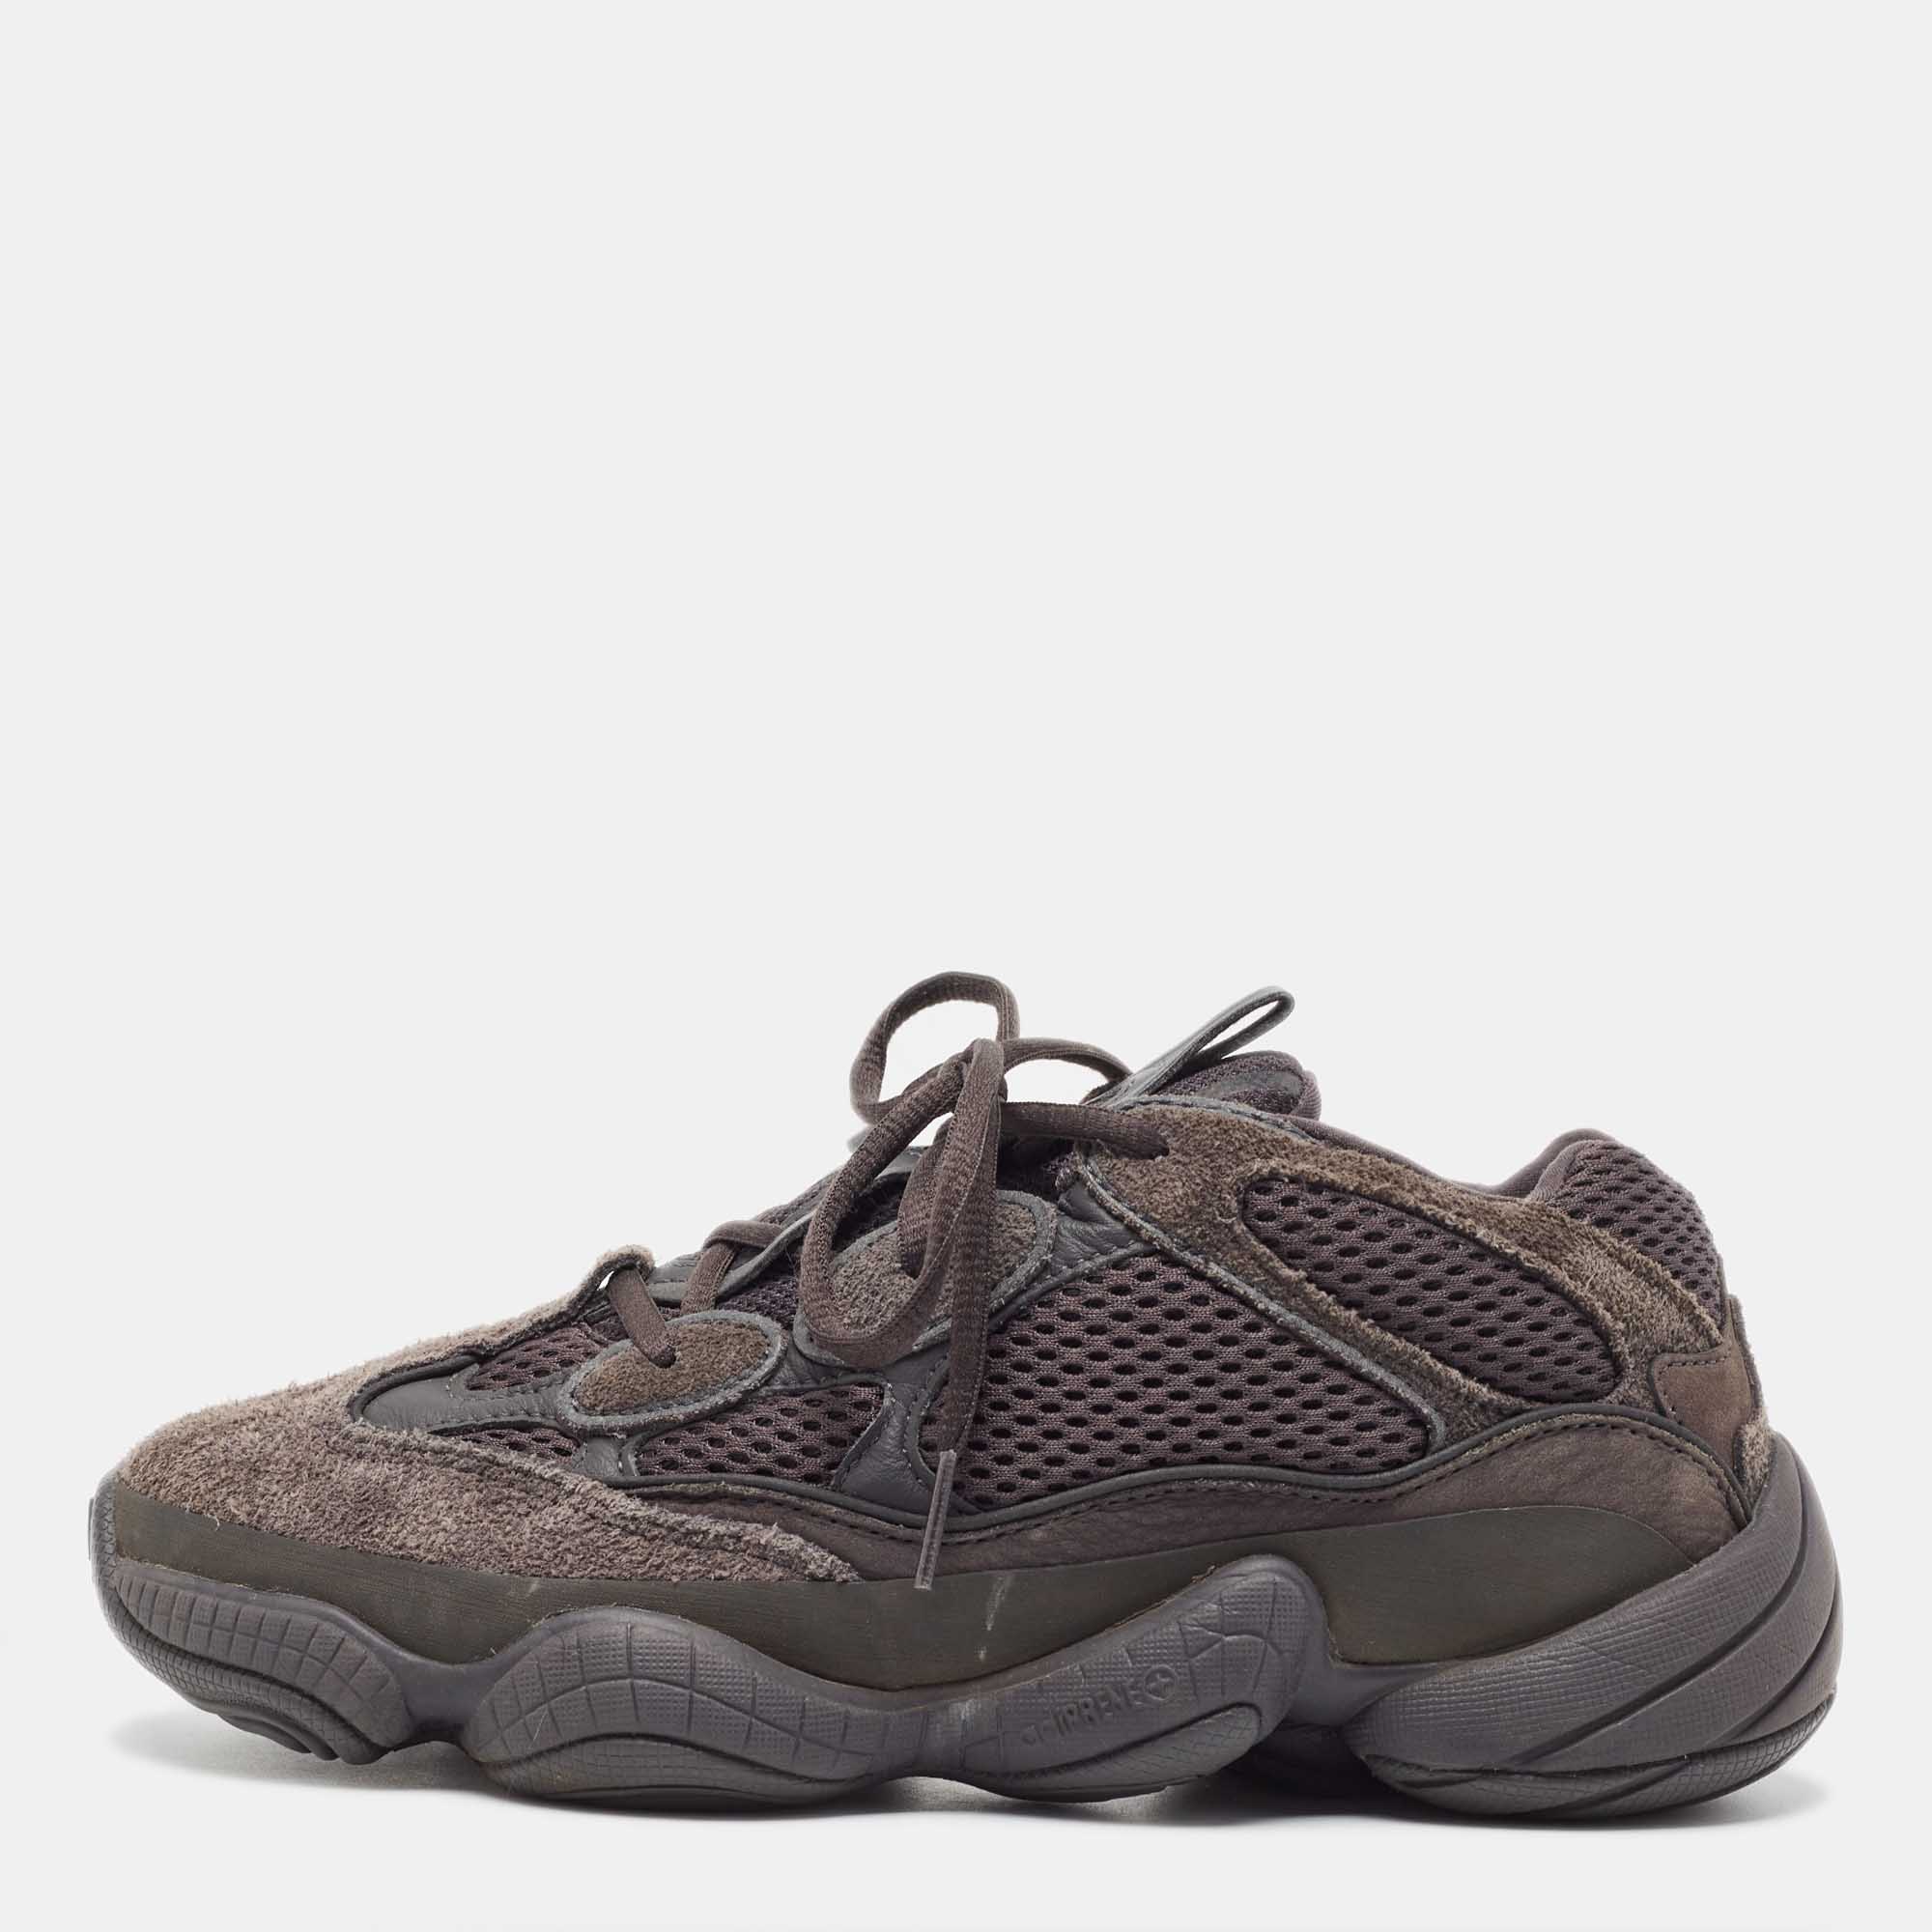 Adidas X Yeezy Black Mesh And Suede Boost Yeezy 500-utility-Black Sneakers Size 40